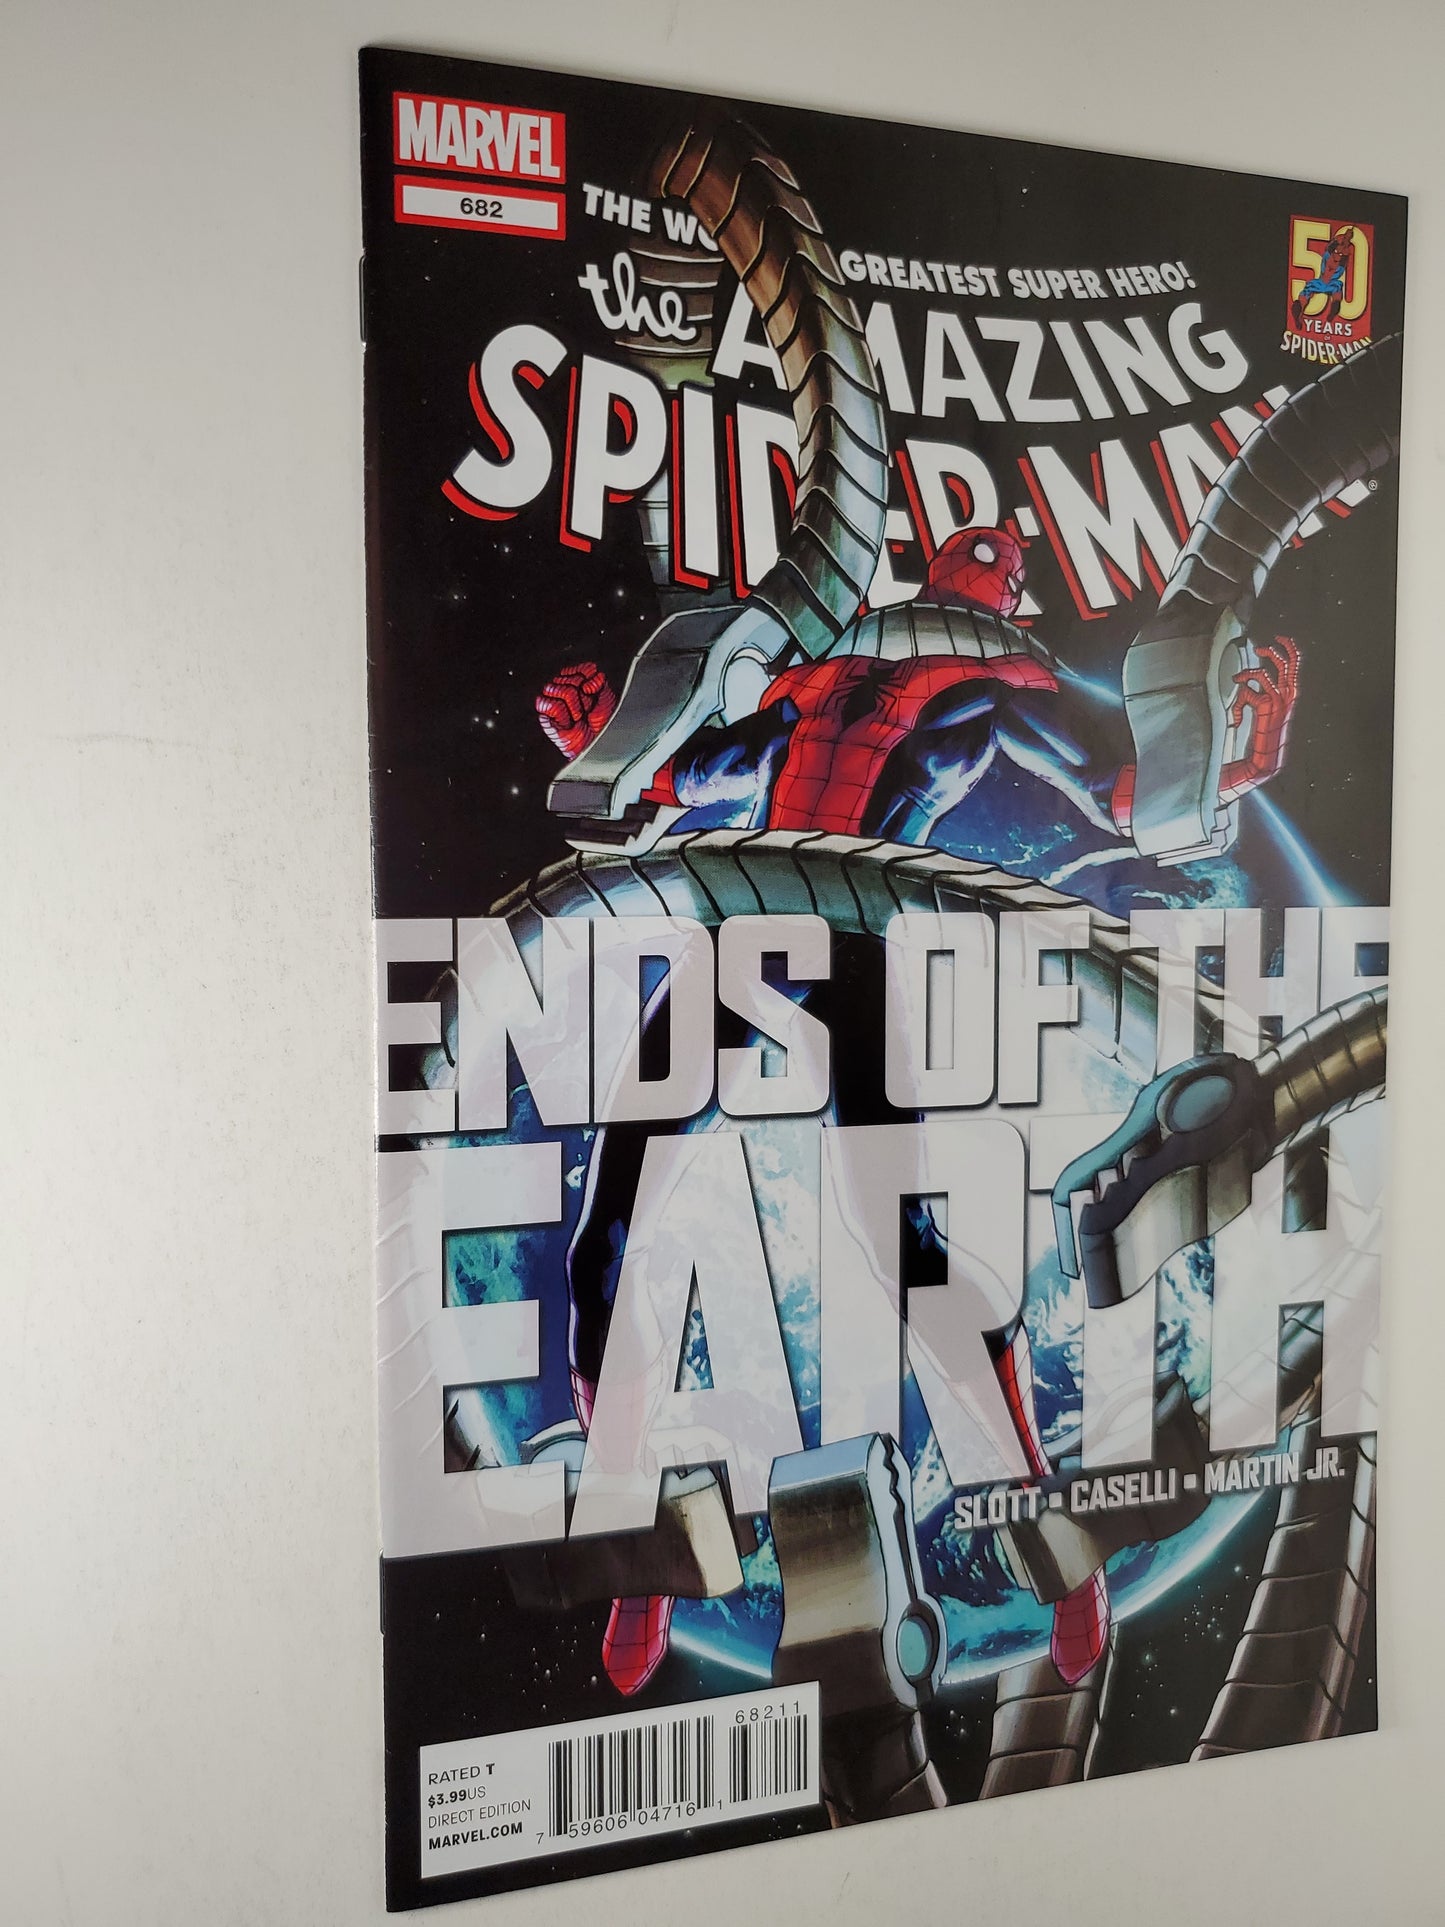 Marvel Amazing Spider-man Vol 1 #682 Ends of the Earth Caselli